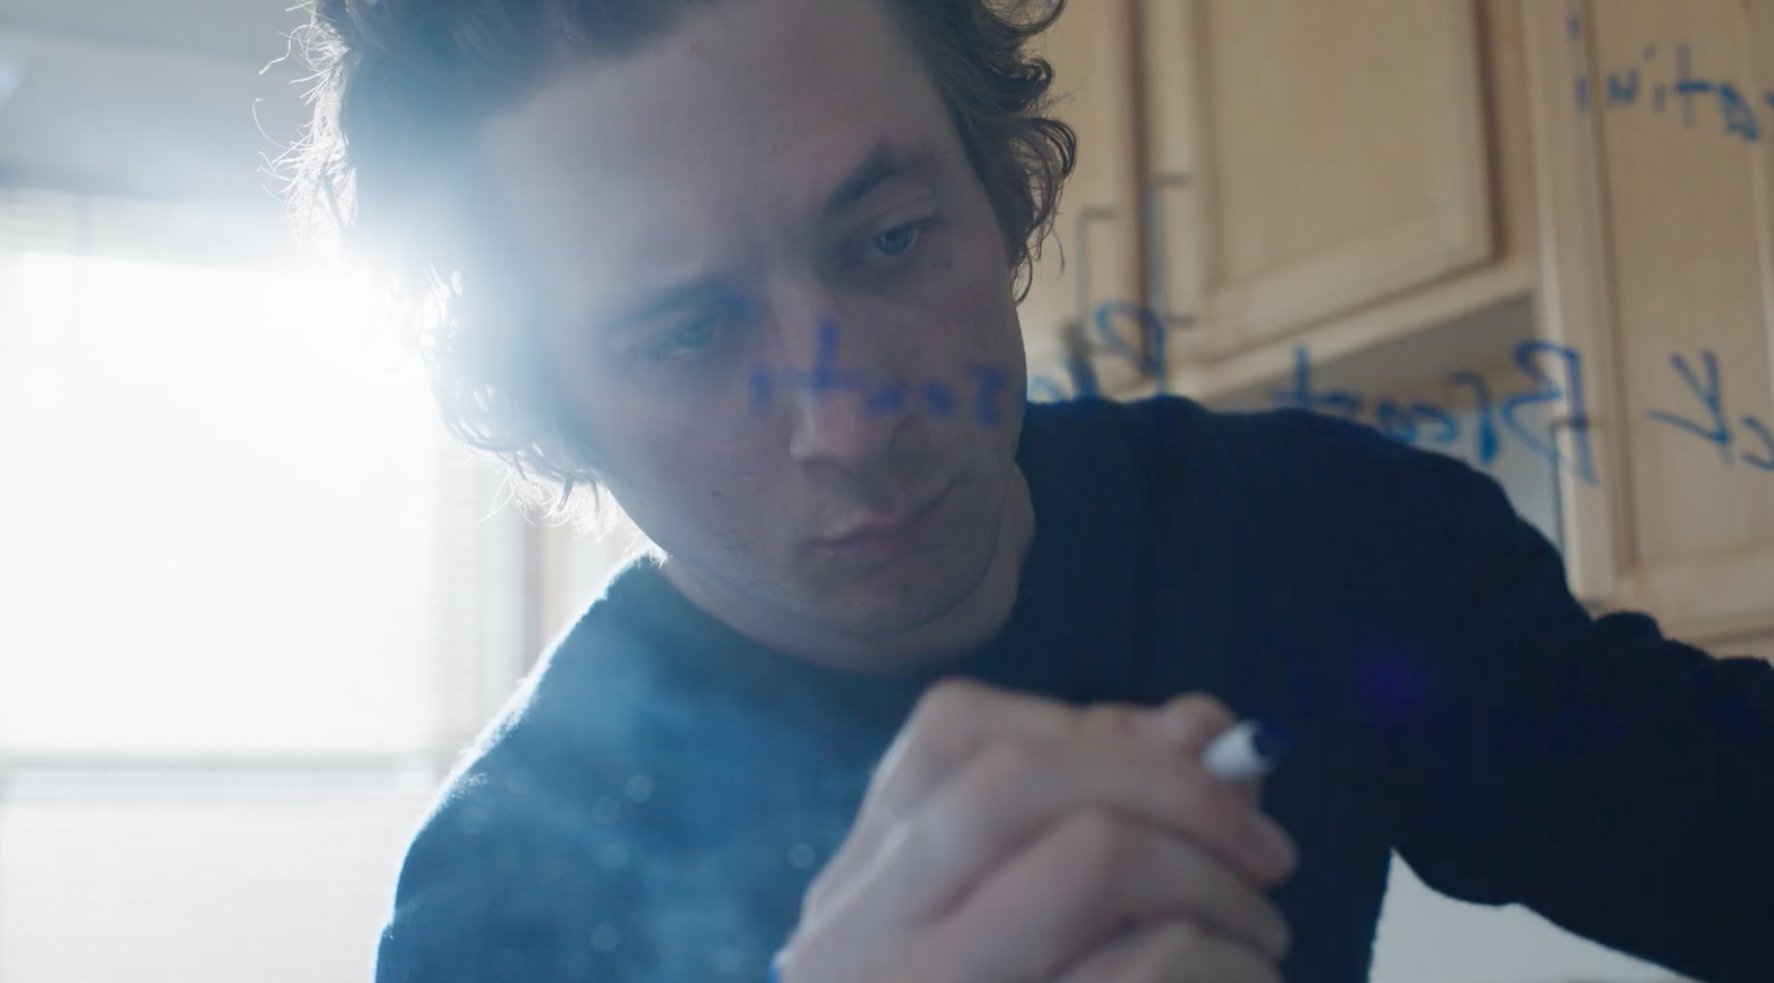 Jeremy Allan White as Carmy, writing on a whiteboard with a blue marker.